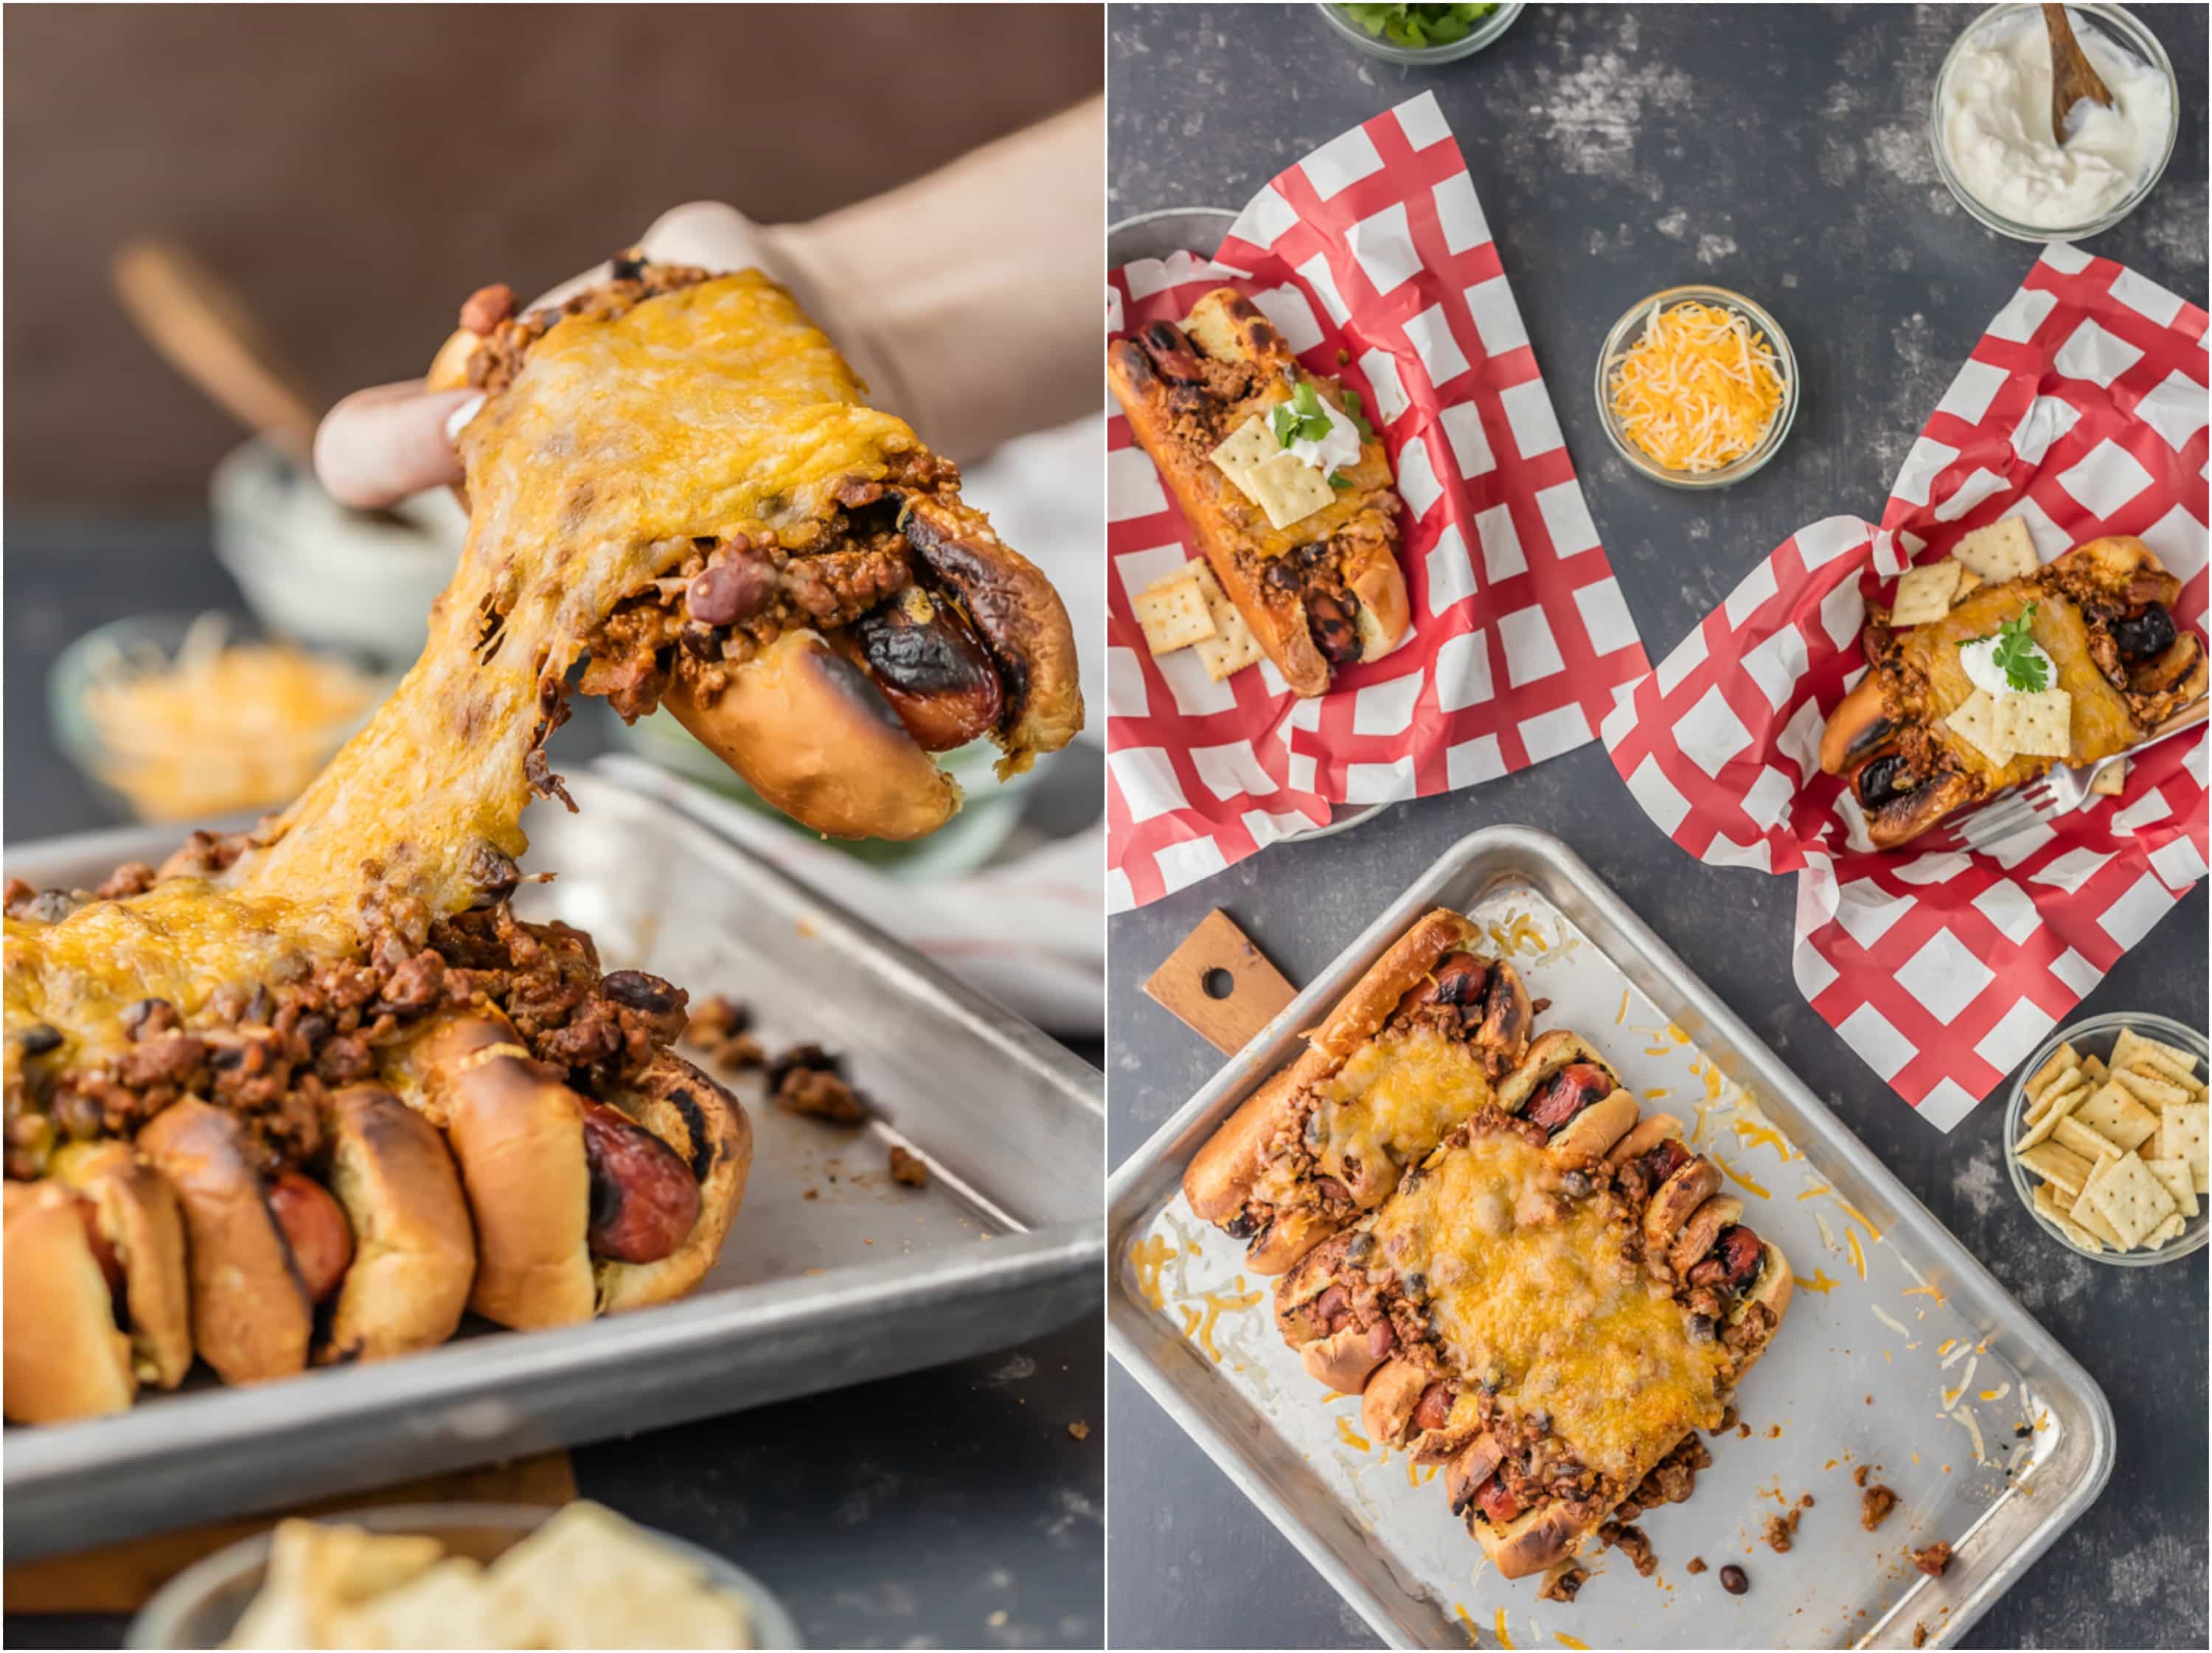 This Chili Dog Recipe all baked together on a sheet pan is the BEST Chili Dog Recipe ever! These Chili Cheese Dogs topped with the best hot dog chili recipe. If you're in the mood for comfort food; toasted buns, grilled hot dogs, best ever chili, and of course tons of cheese; this recipe is for you! 